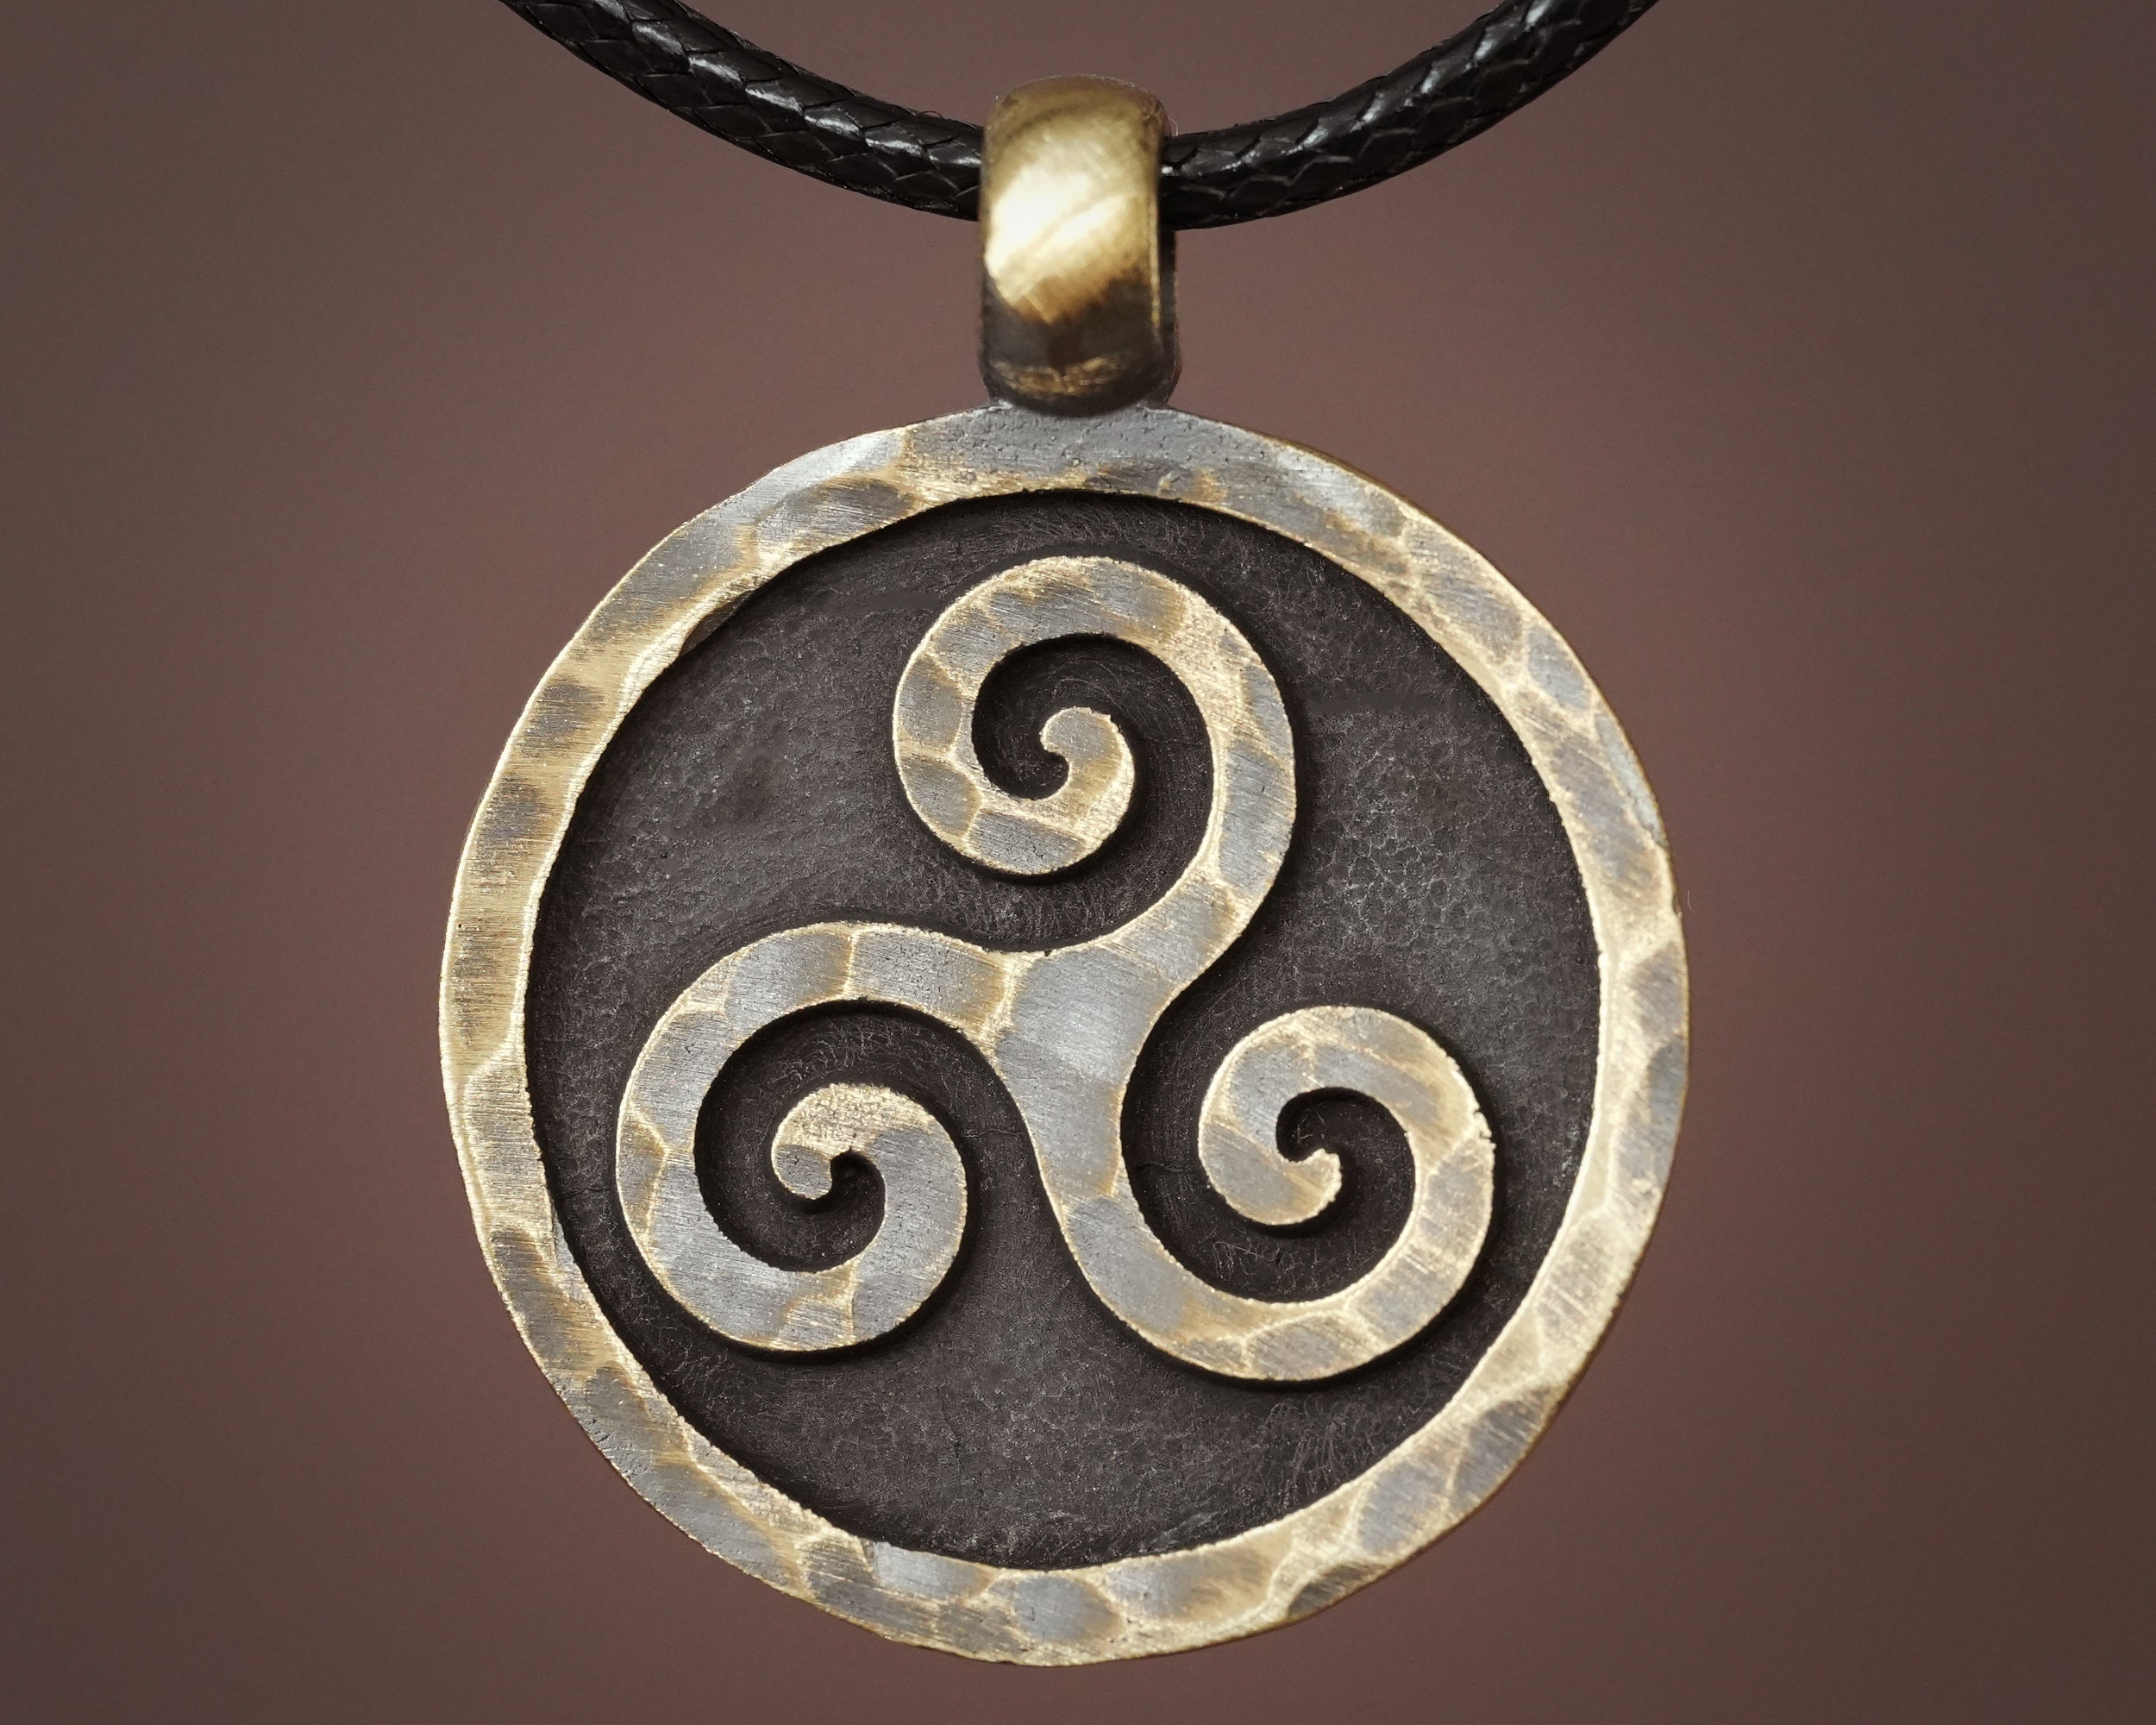 Lyria Celtic Triple Spiral Necklace 24 / Chalcedony